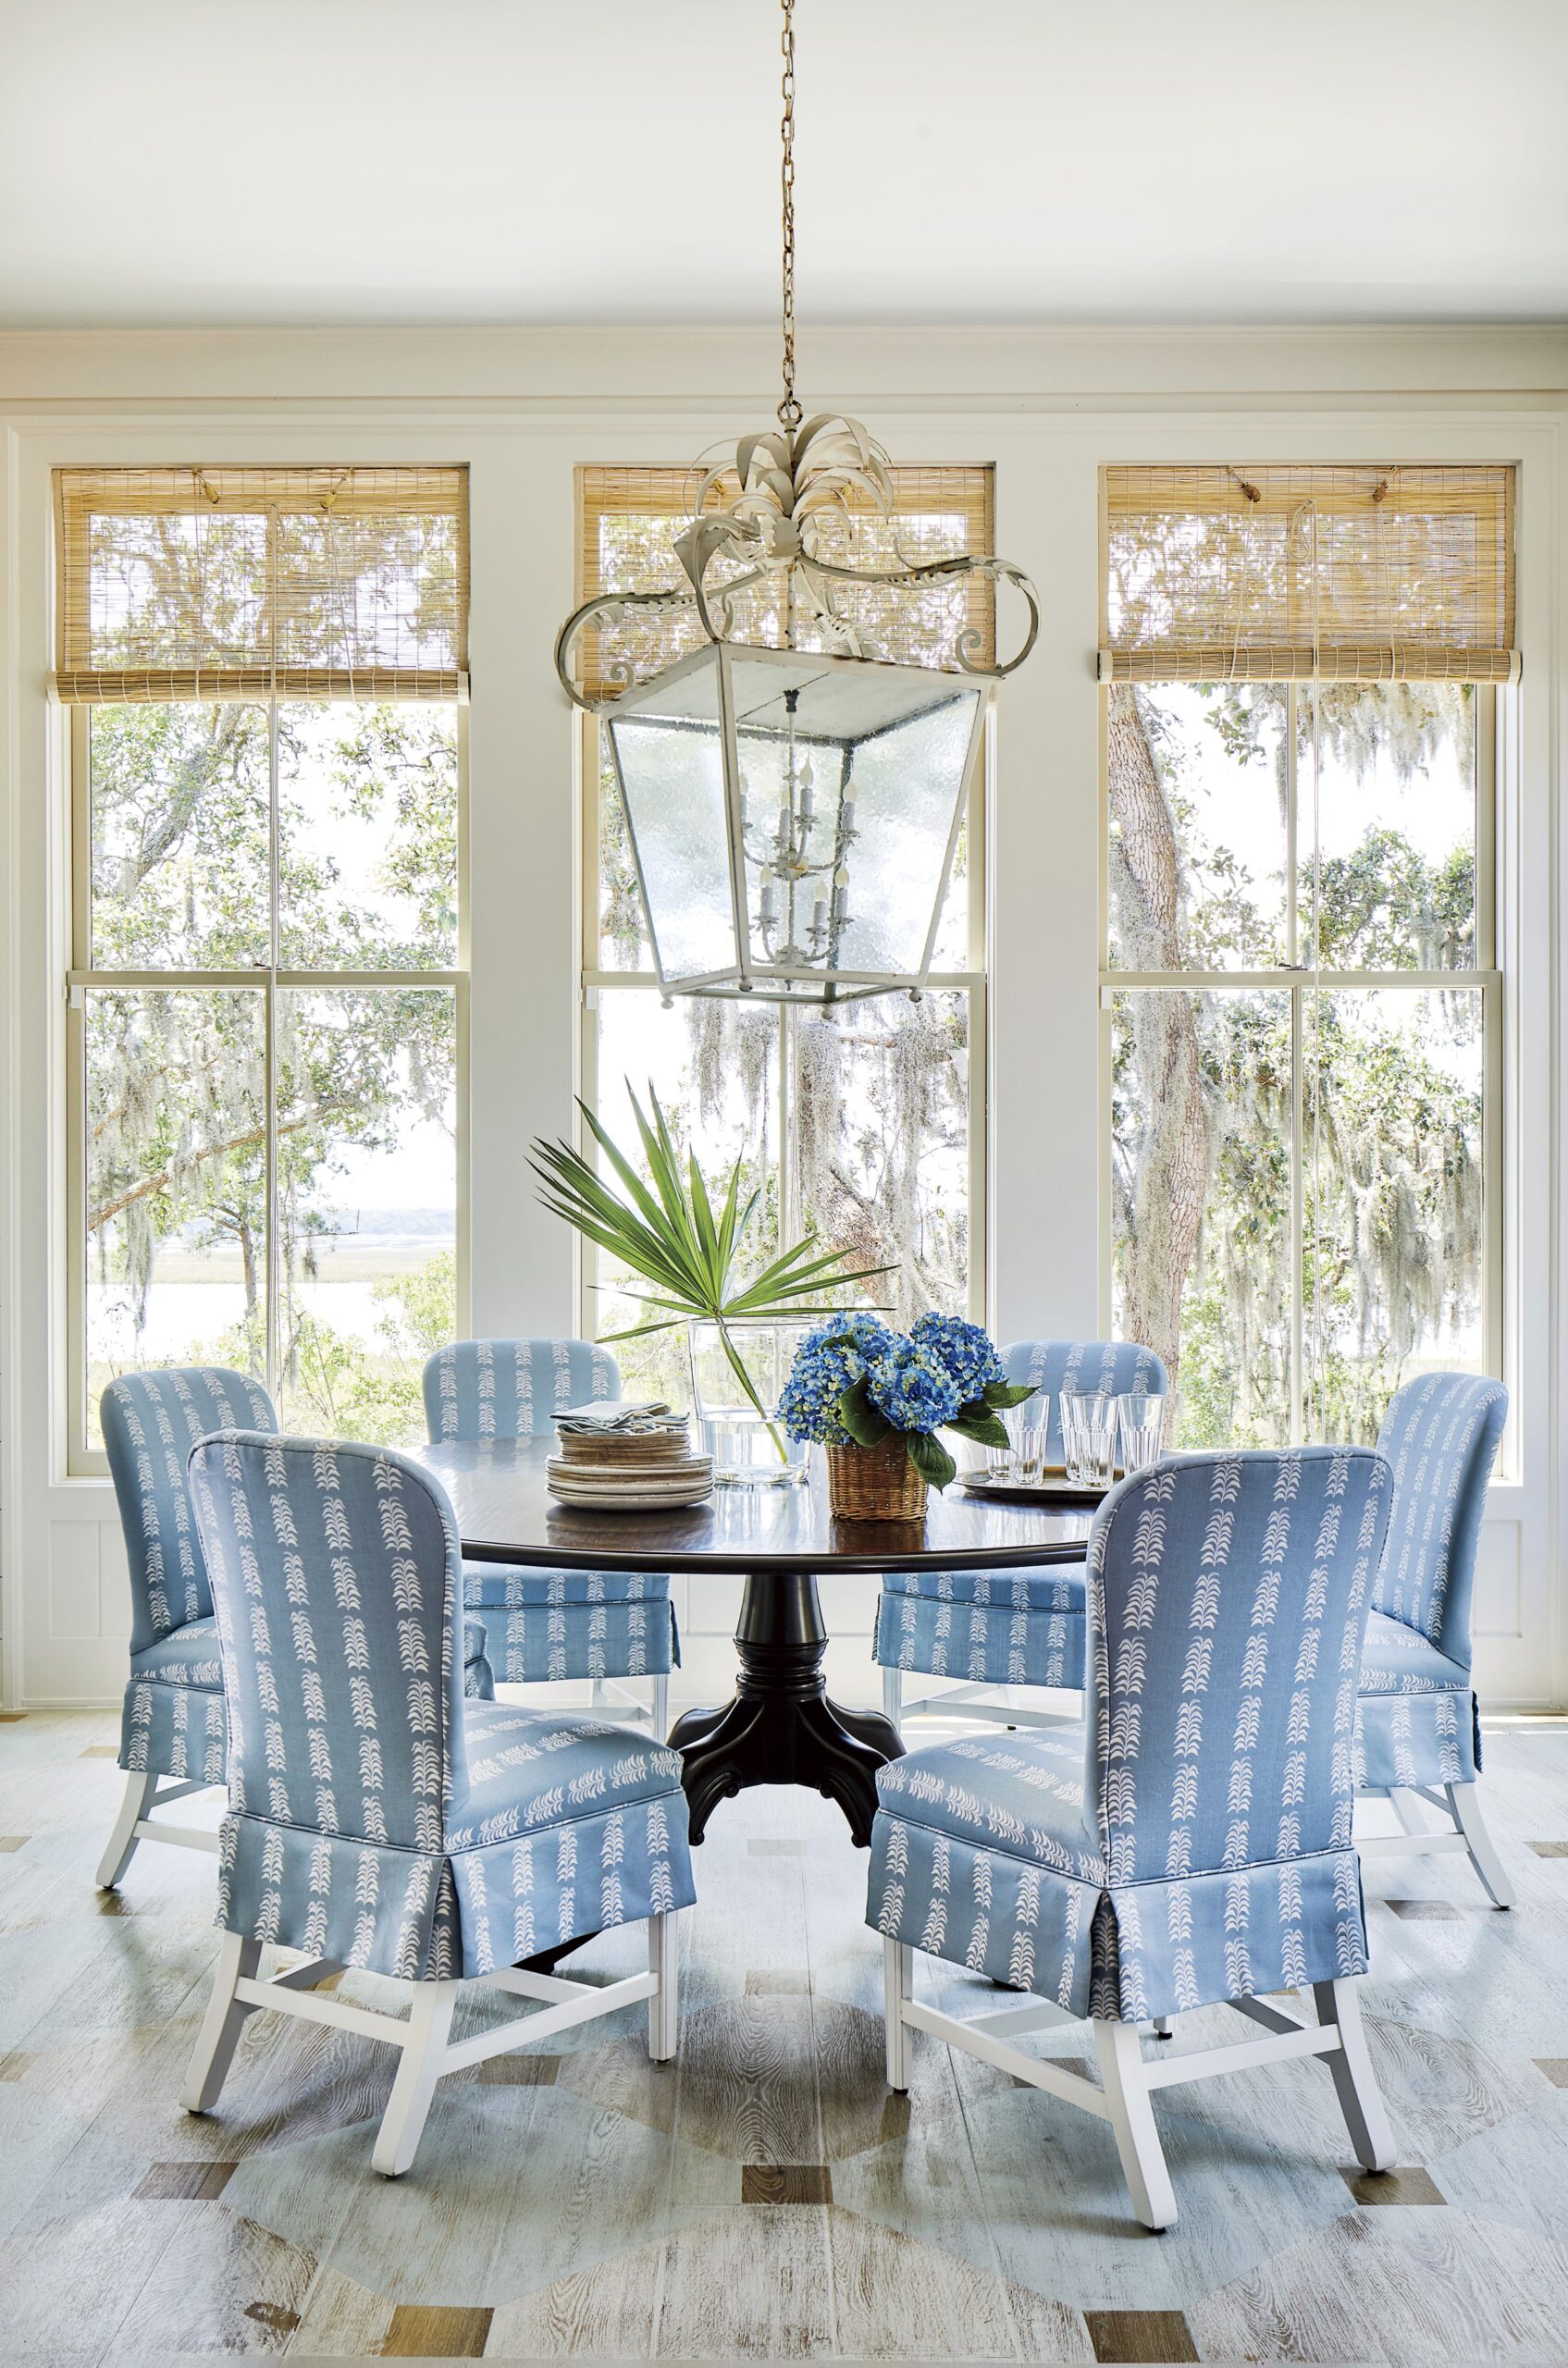 Home Tour: Coastal Serenity Meets Southern Charm in This Crane Island Home